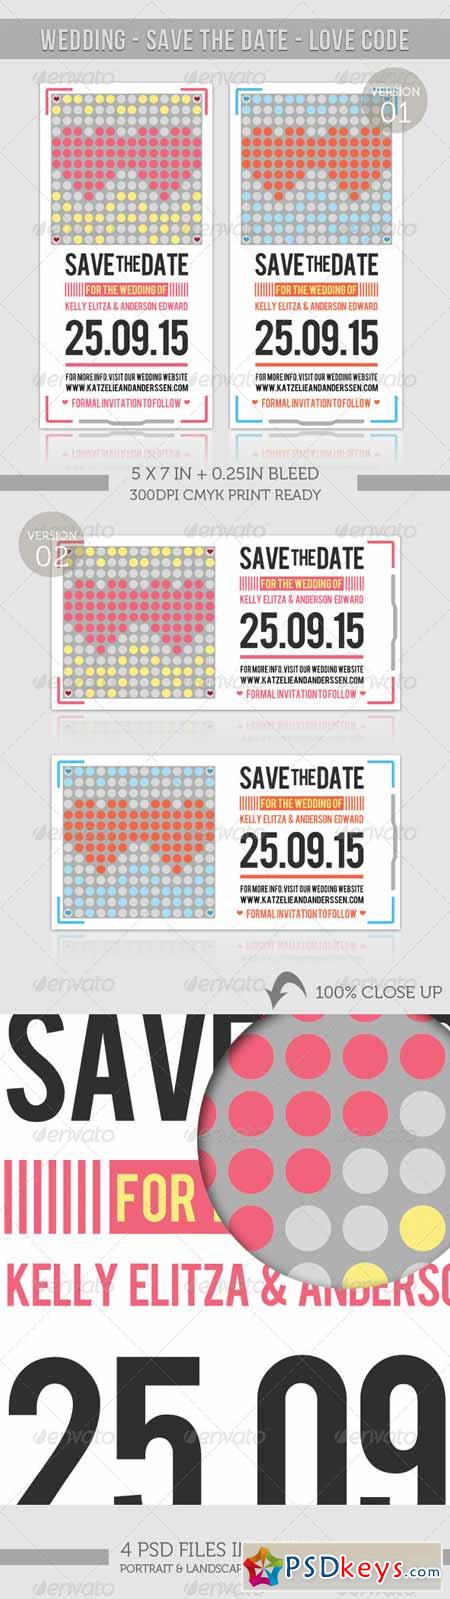 Wedding - Save The Date - Love Code 2406052